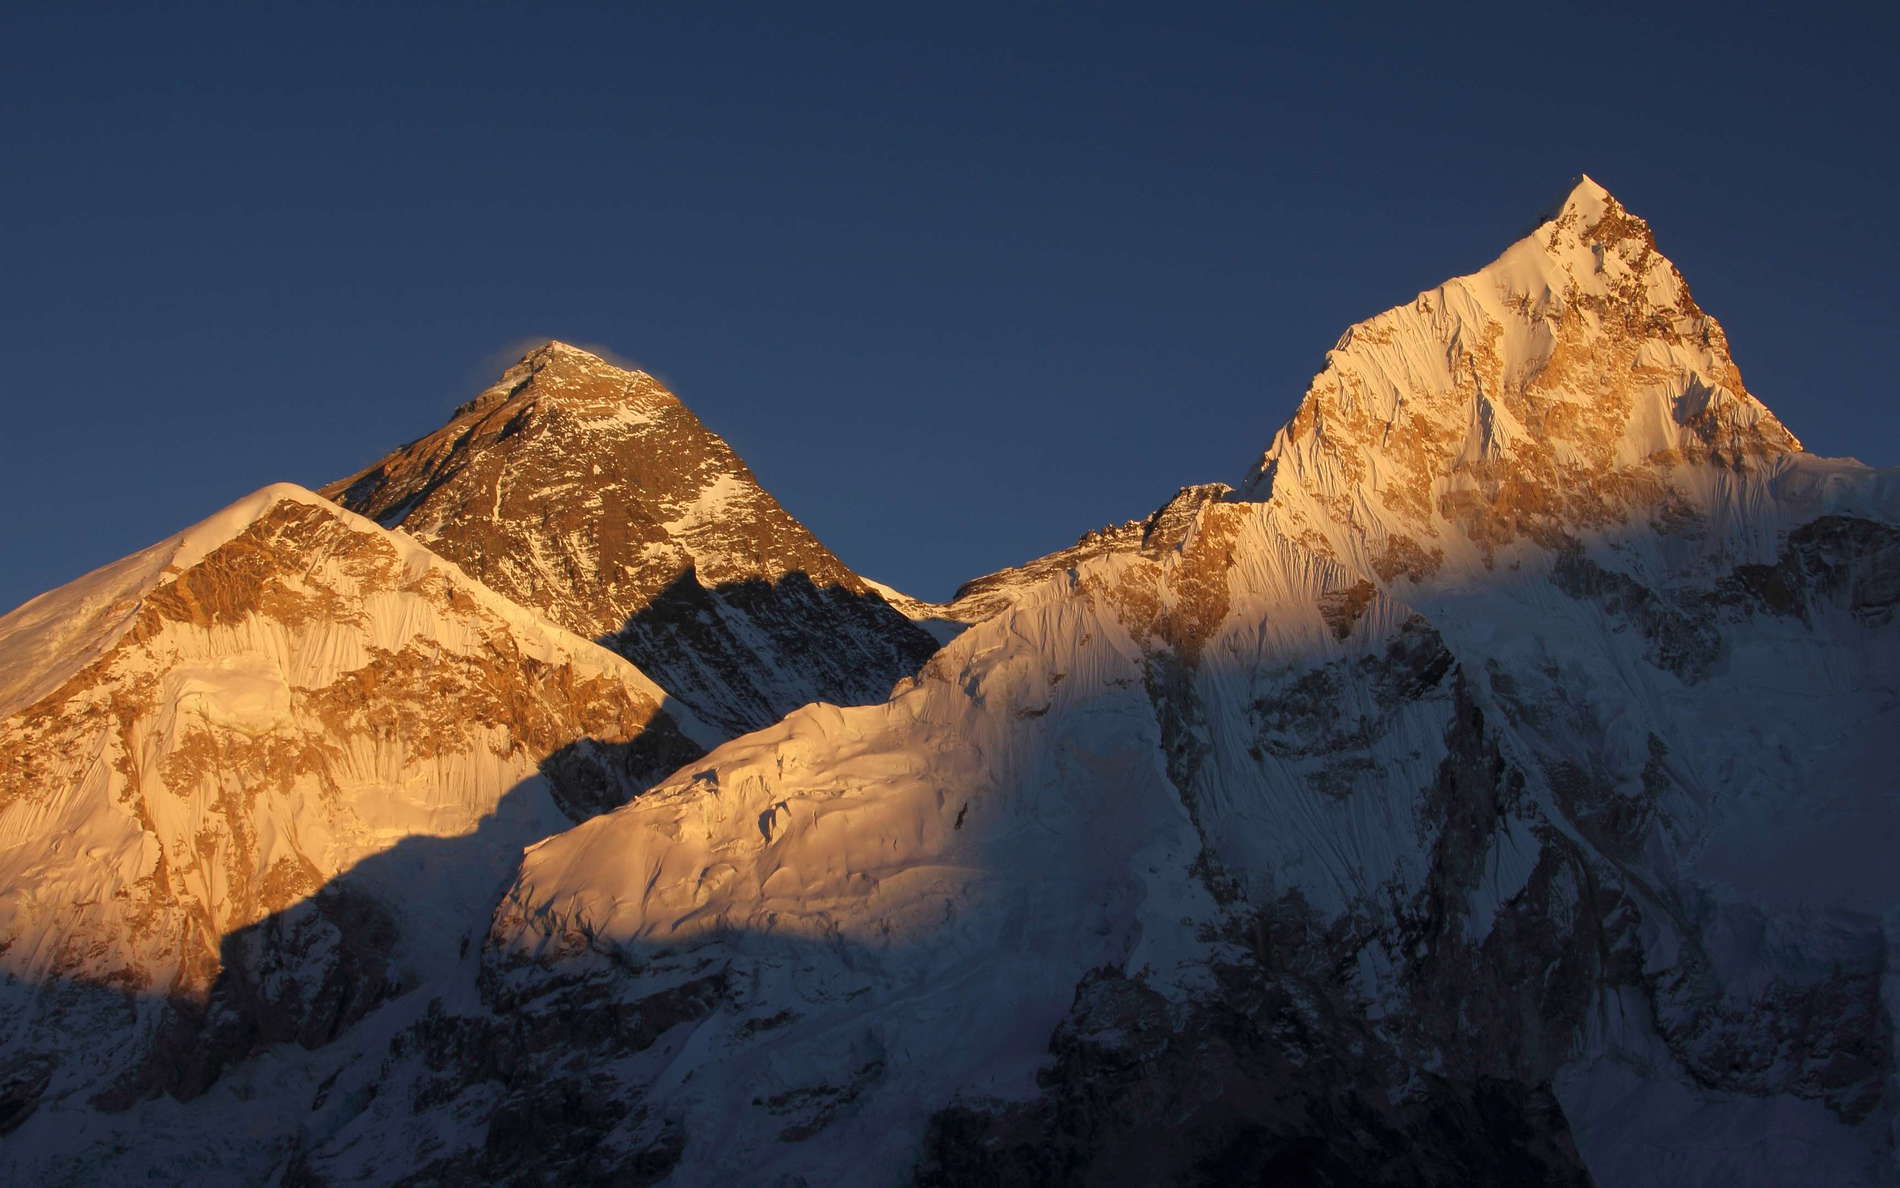 Mt. Everest and Nuptse west face